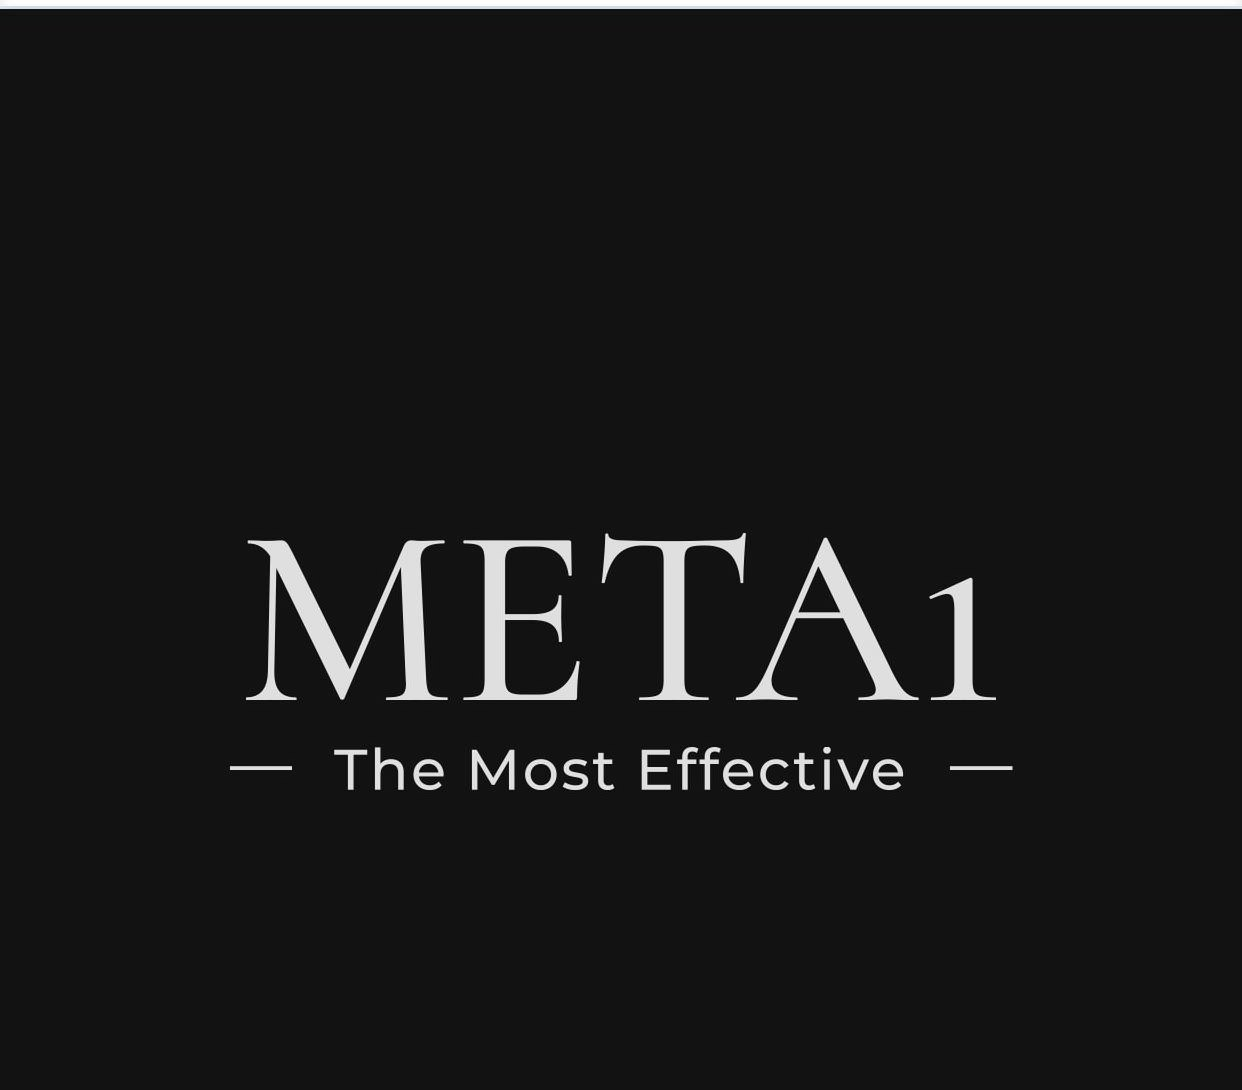  META1 -THE MOST EFFECTIVE-